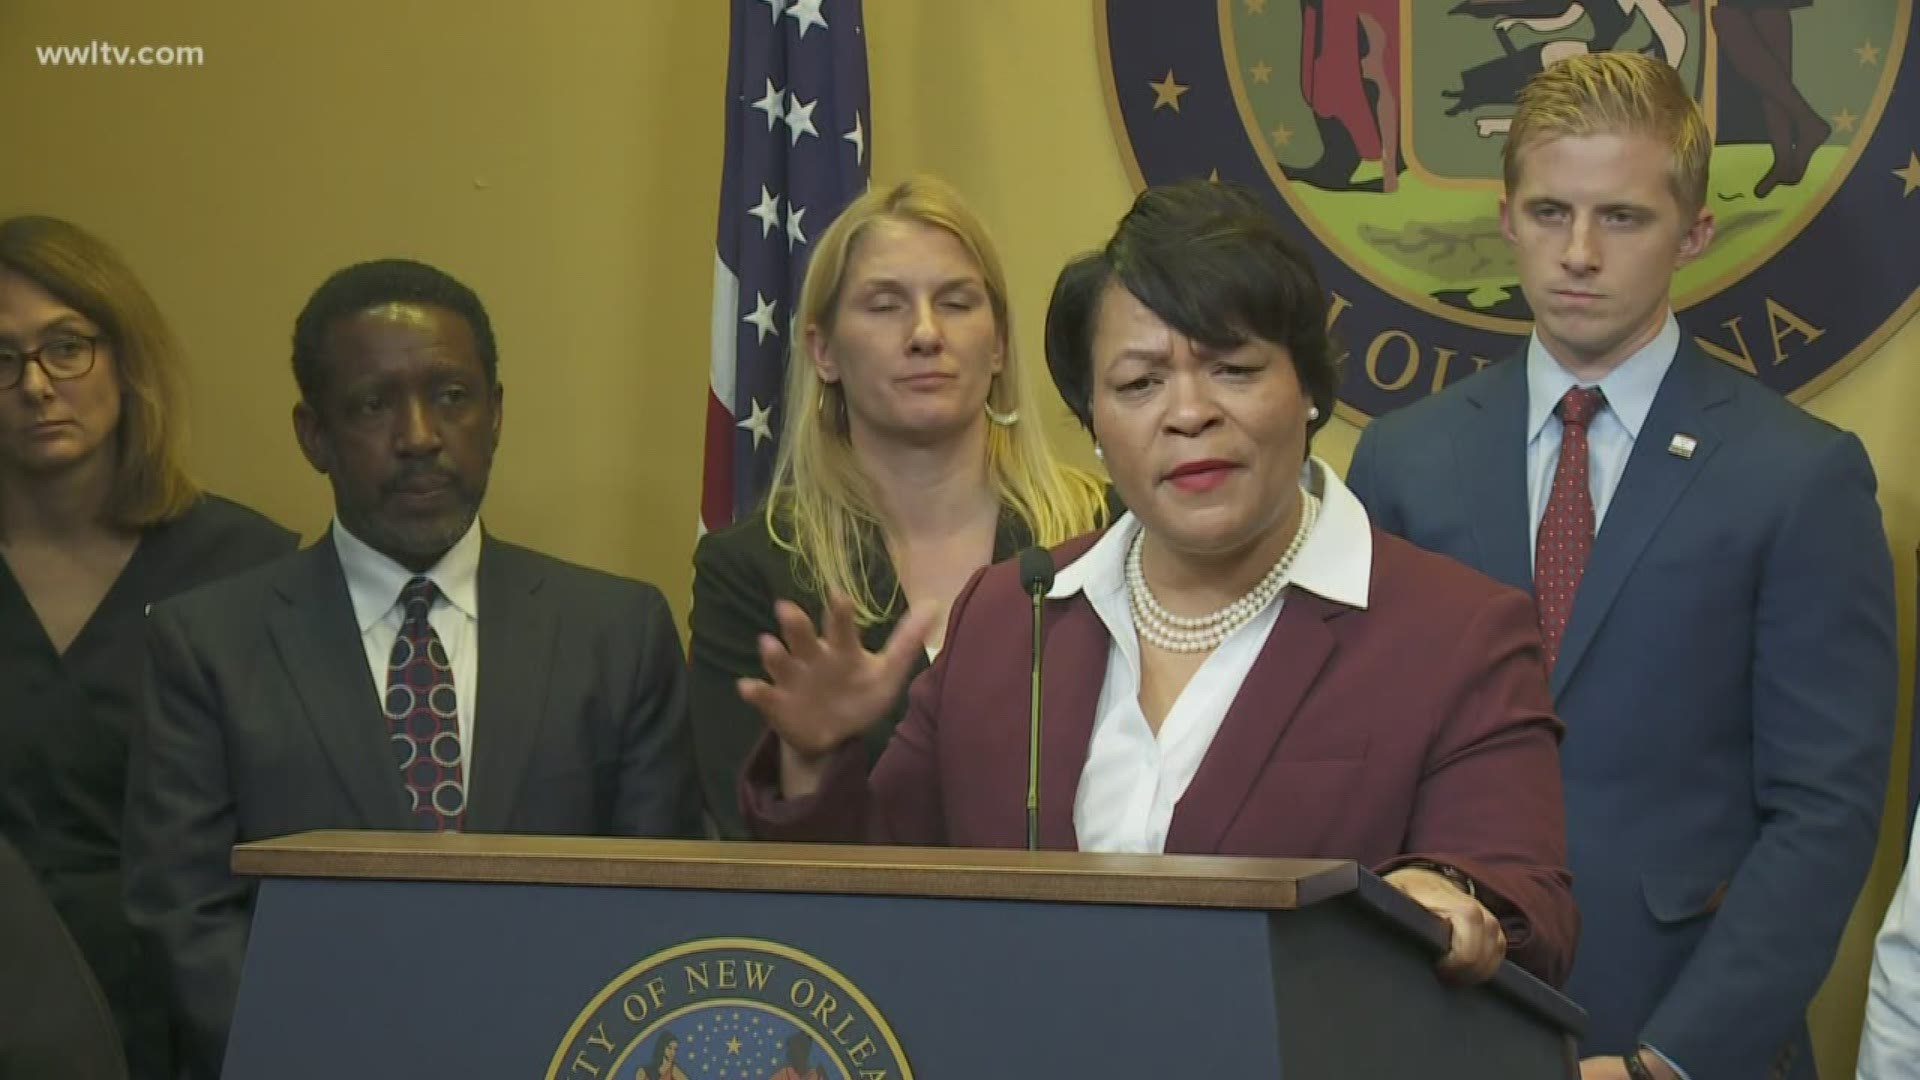 Mayor Latoya Cantrell presented the new strategy, which is taking the long view. The mayor emphasized this will be a "generational plan." Its impact may not be felt fully until after her time in office. That said, the plan is threefold.